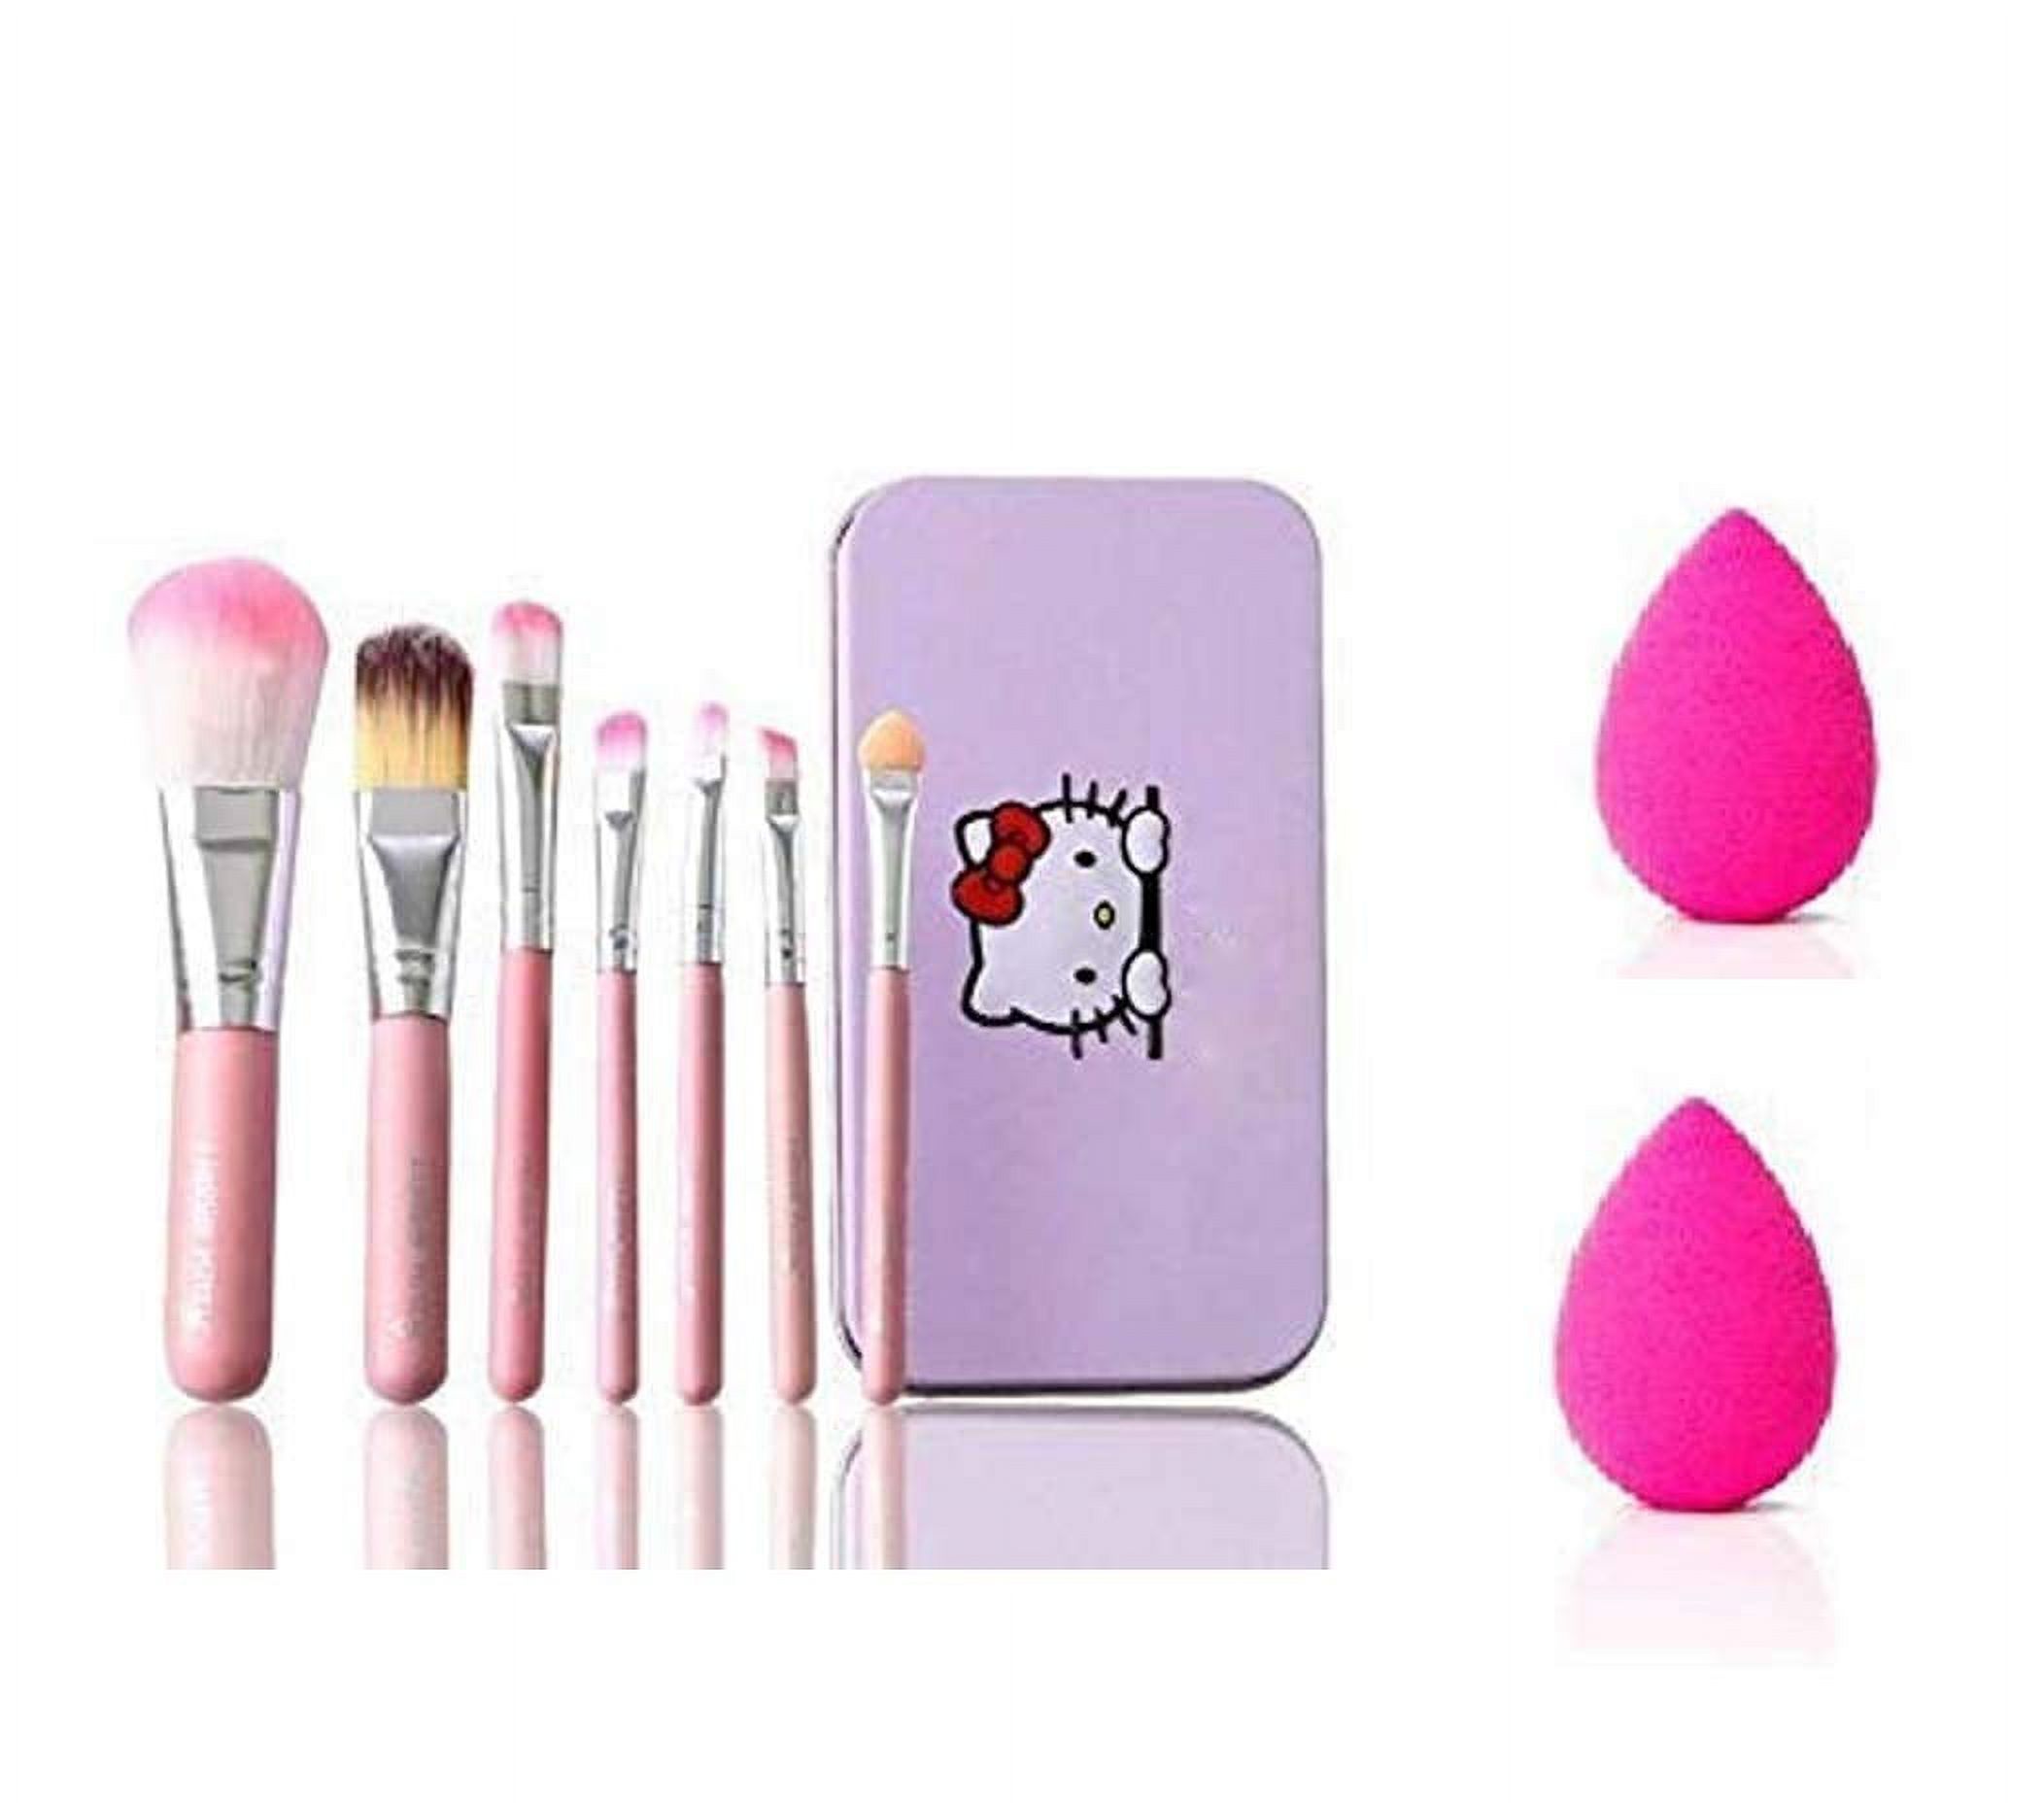 Ronzille Hello Kitty Complete Makeup Brush Kit with a Storage Box Set of 7 Pieces + 2 Sponge Puff (Pink) - image 1 of 3